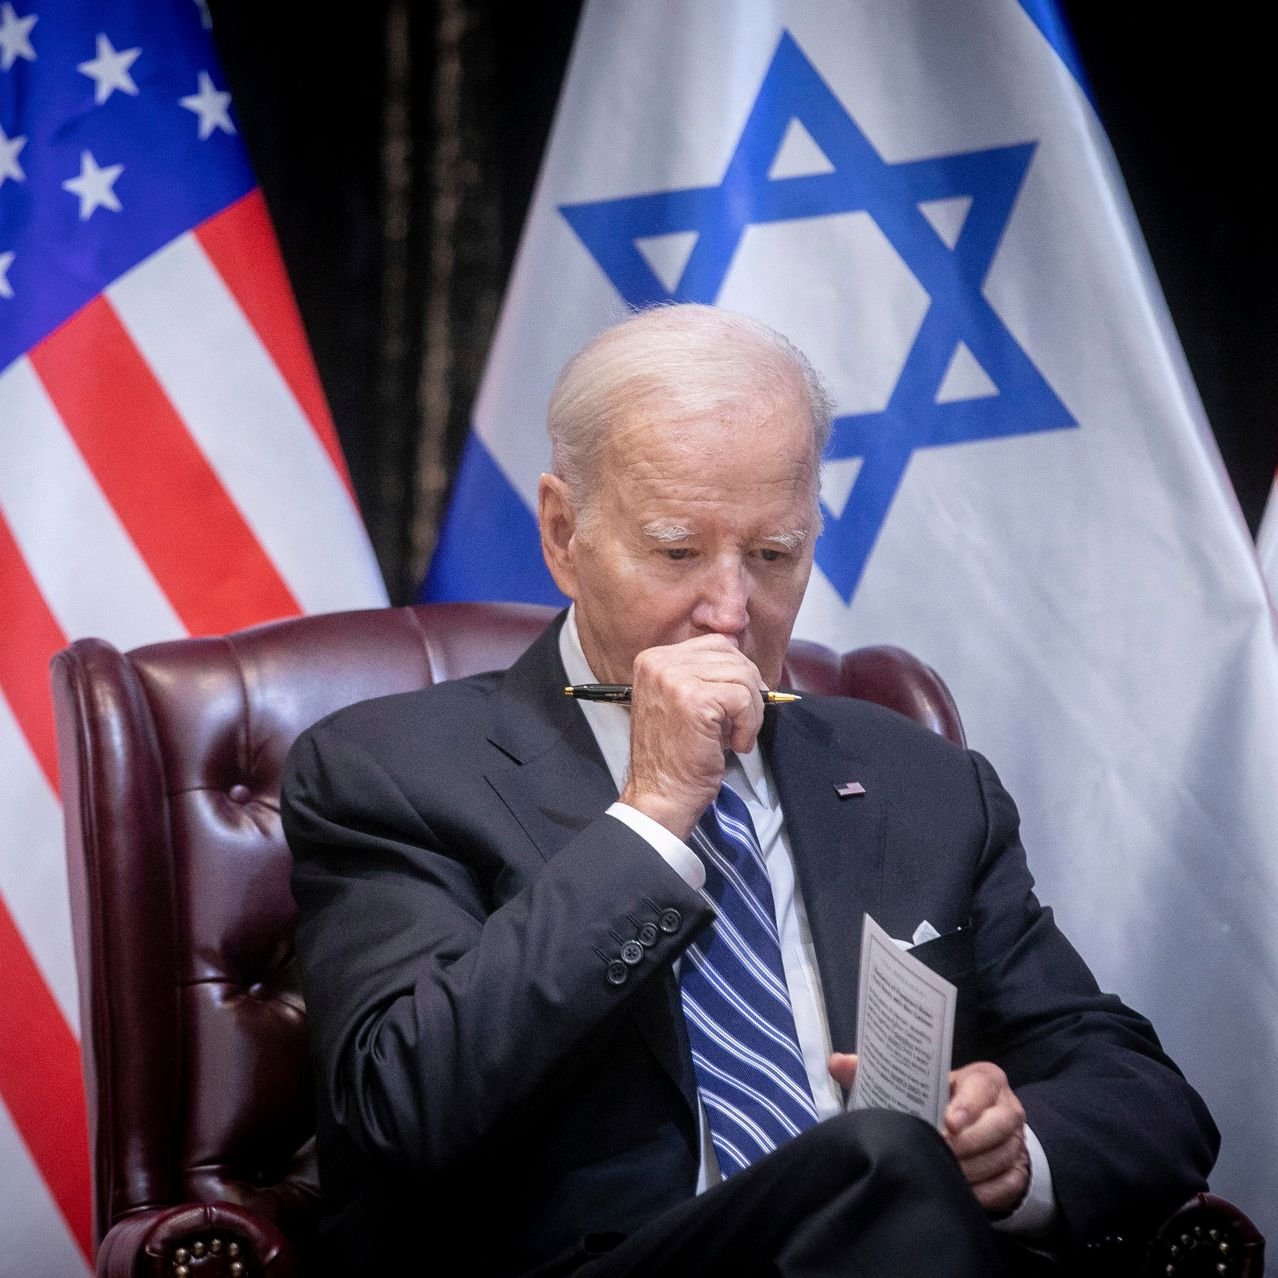 Biden Administration Faces Criticism for Simultaneous Aid and Arms Support in Gaza Conflict